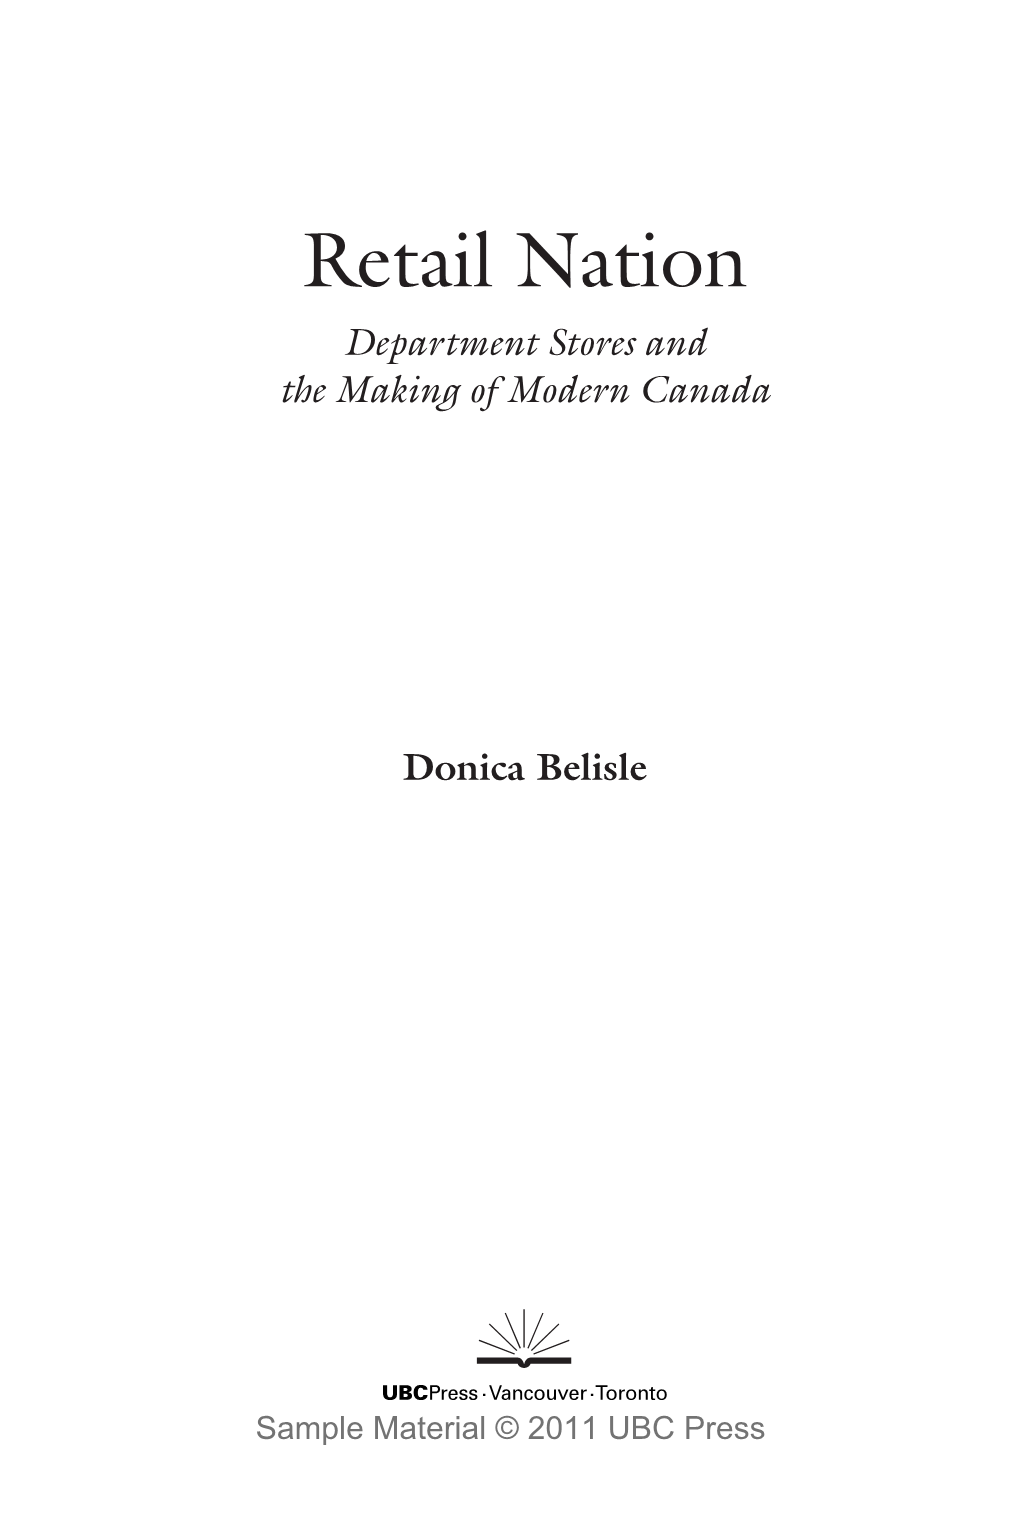 Retail Nation Department Stores and the Making of Modern Canada